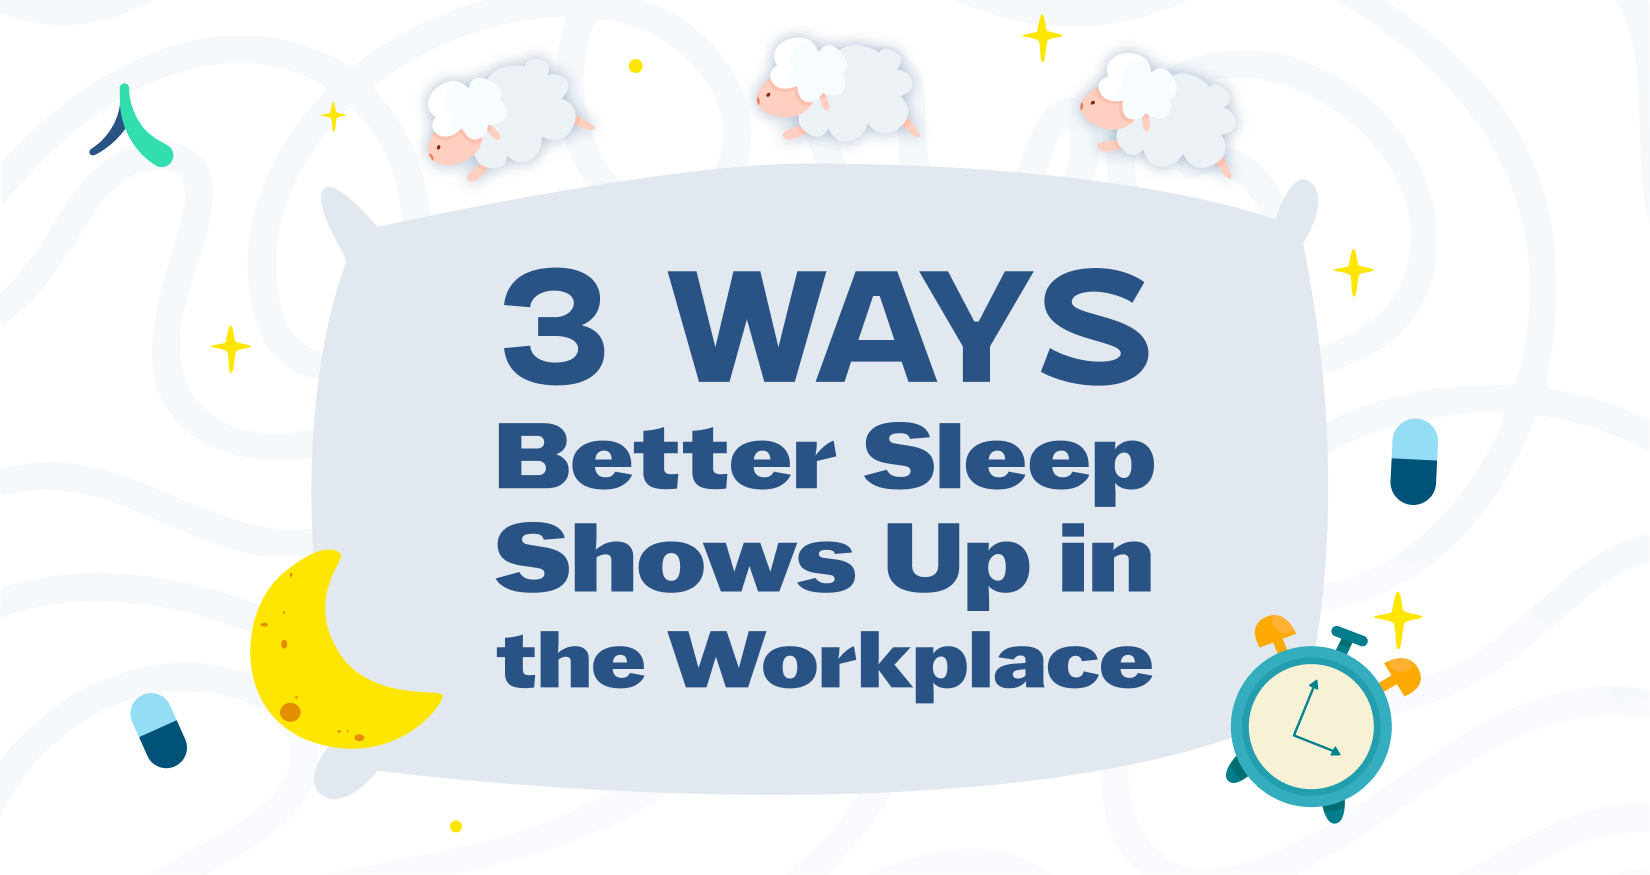 3 Ways Better Sleep Shows Up in the Workplace